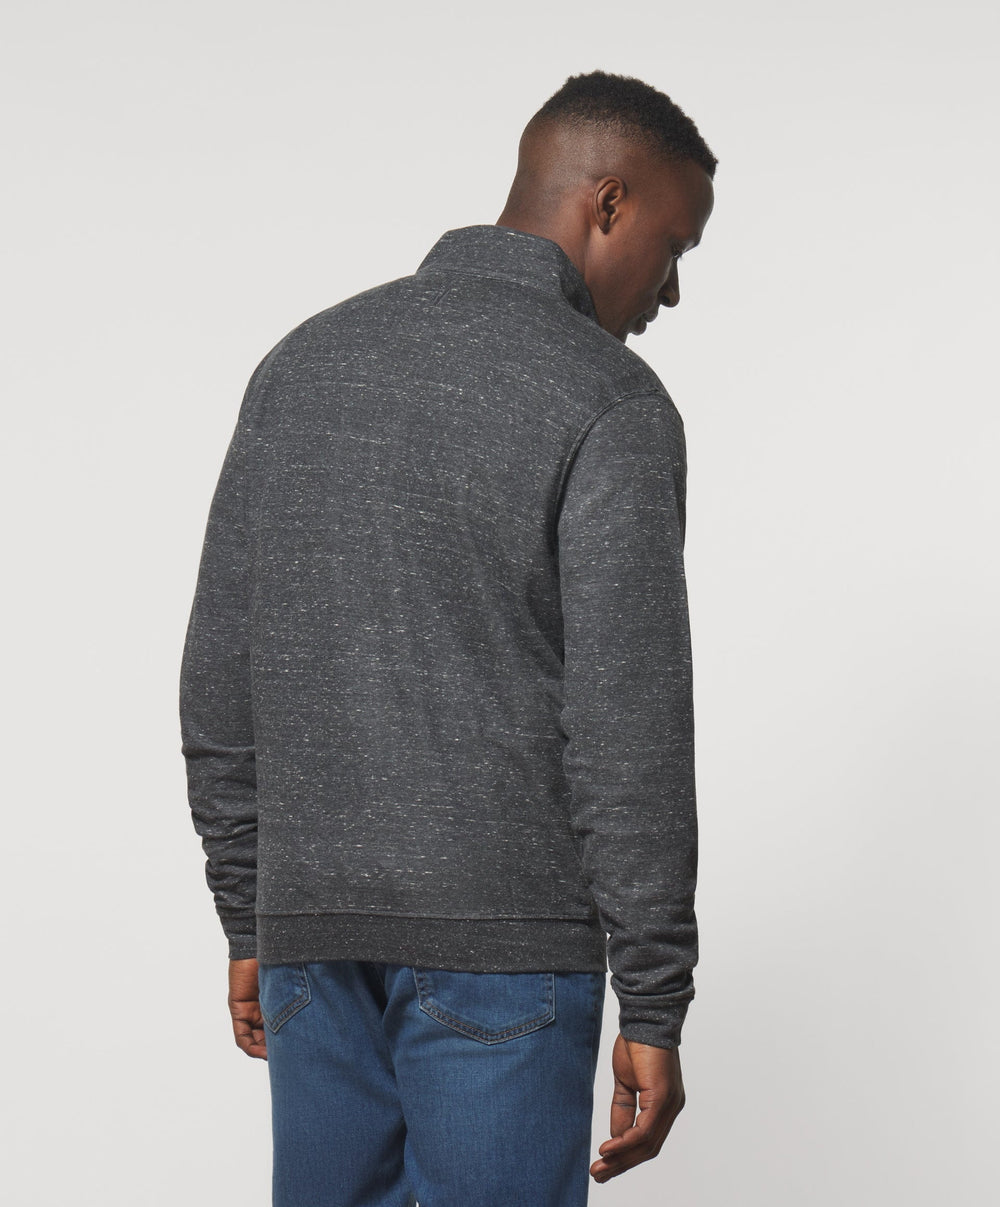 SULLY 1/4 SWEATER (PEWTER) - JOHNNIE-O